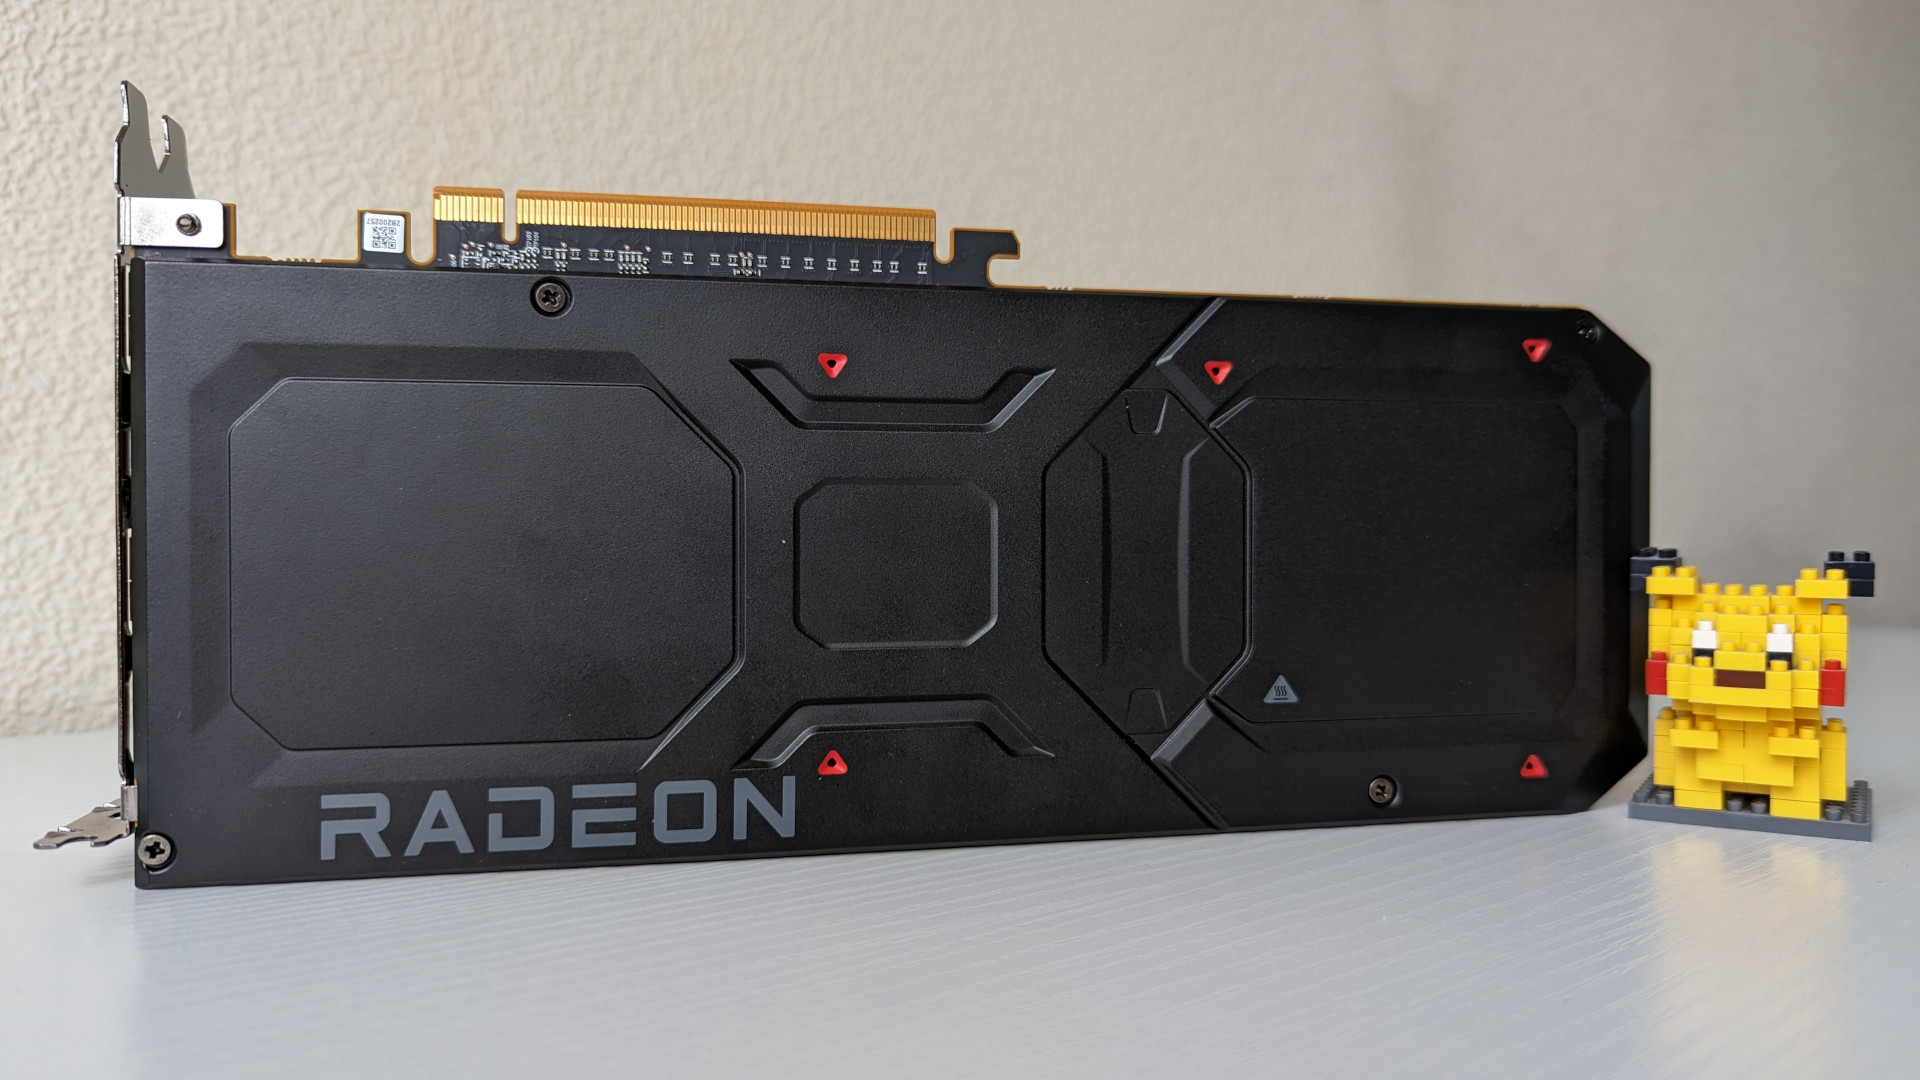 The backplate of the AMD Radeon RX 7900 XT